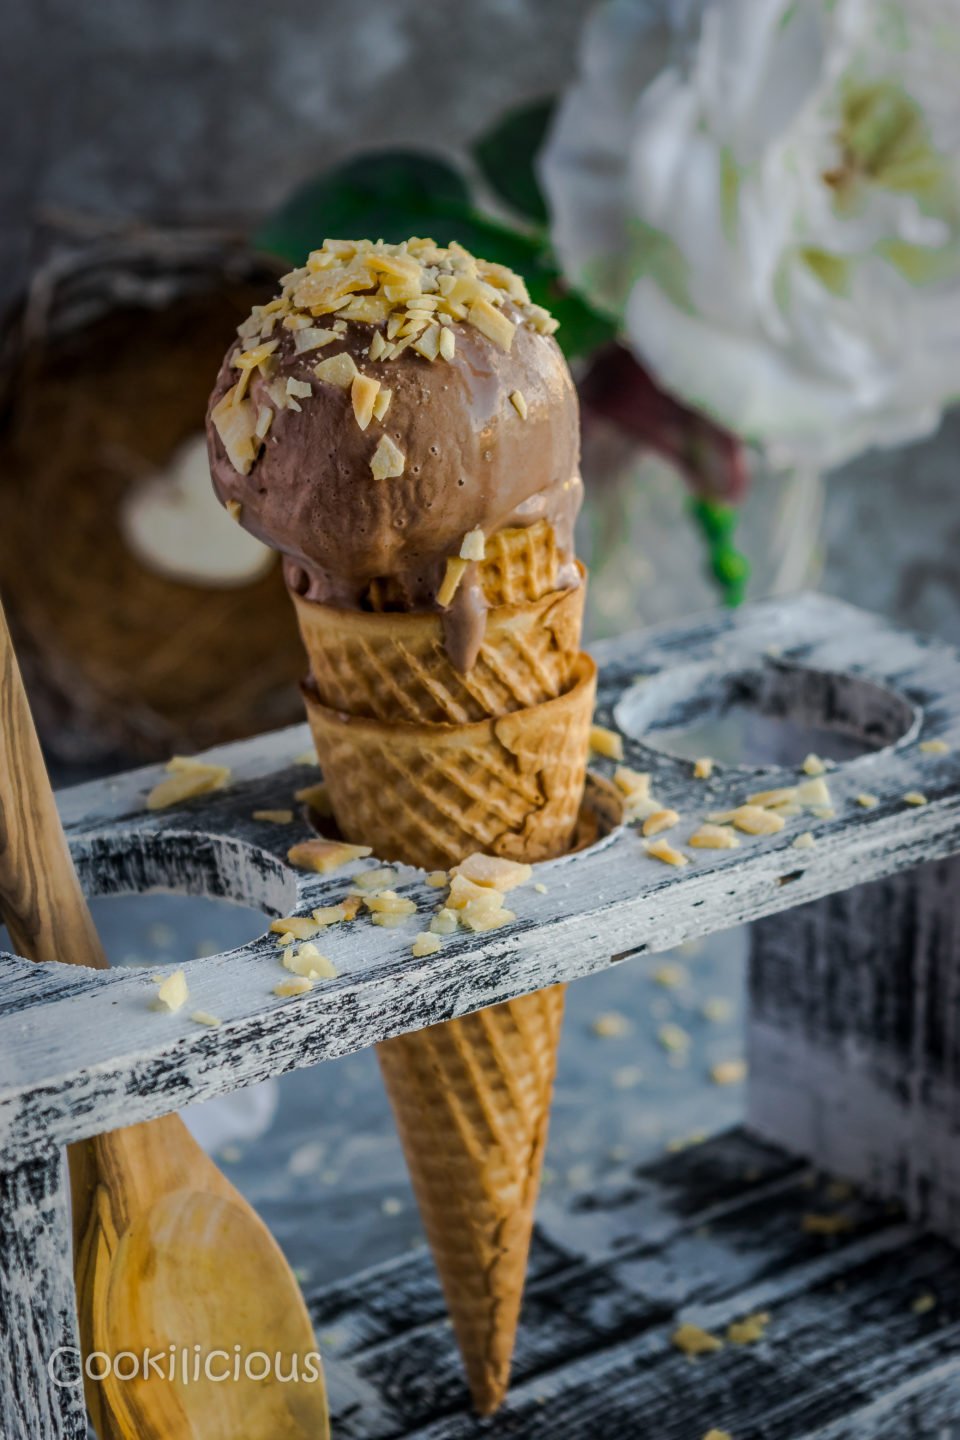 Coconut Chocolate Dairy-Free Ice Cream cone with coconut chips sprinkled on top